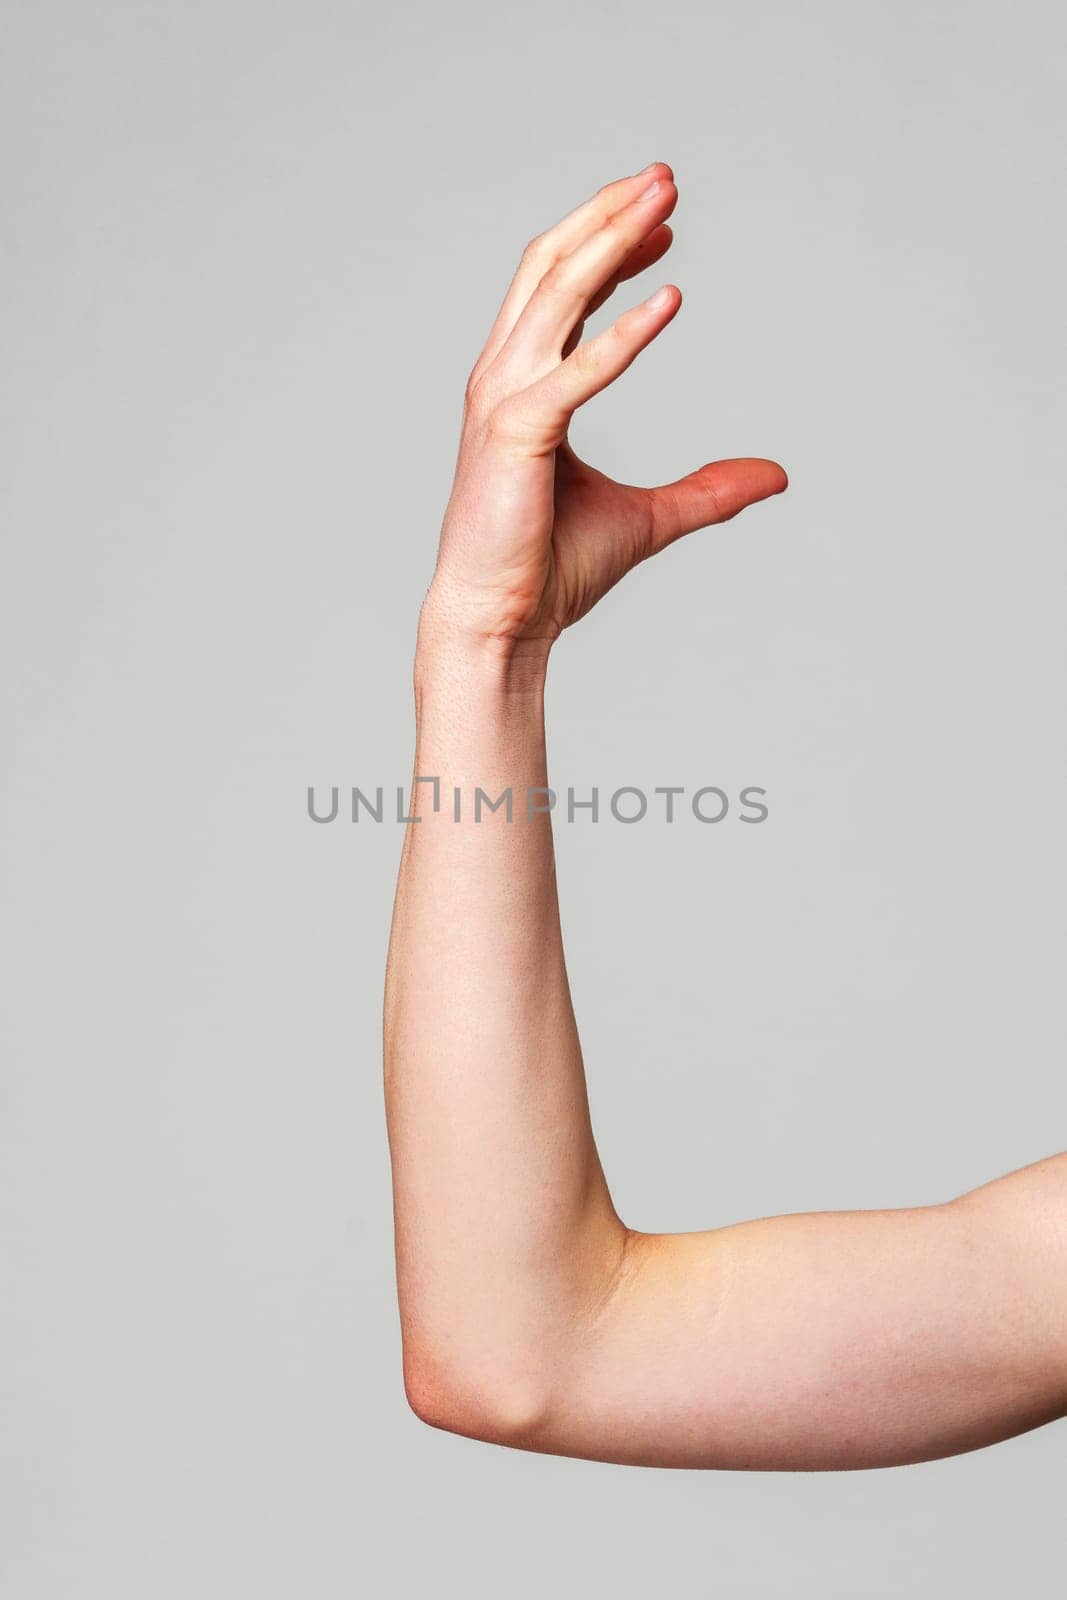 A single human arm is raised, captured in profile with the elbow bent and the hand slightly curved. The arms soft lighting emphasizes its form against the plain, unadorned backdrop.